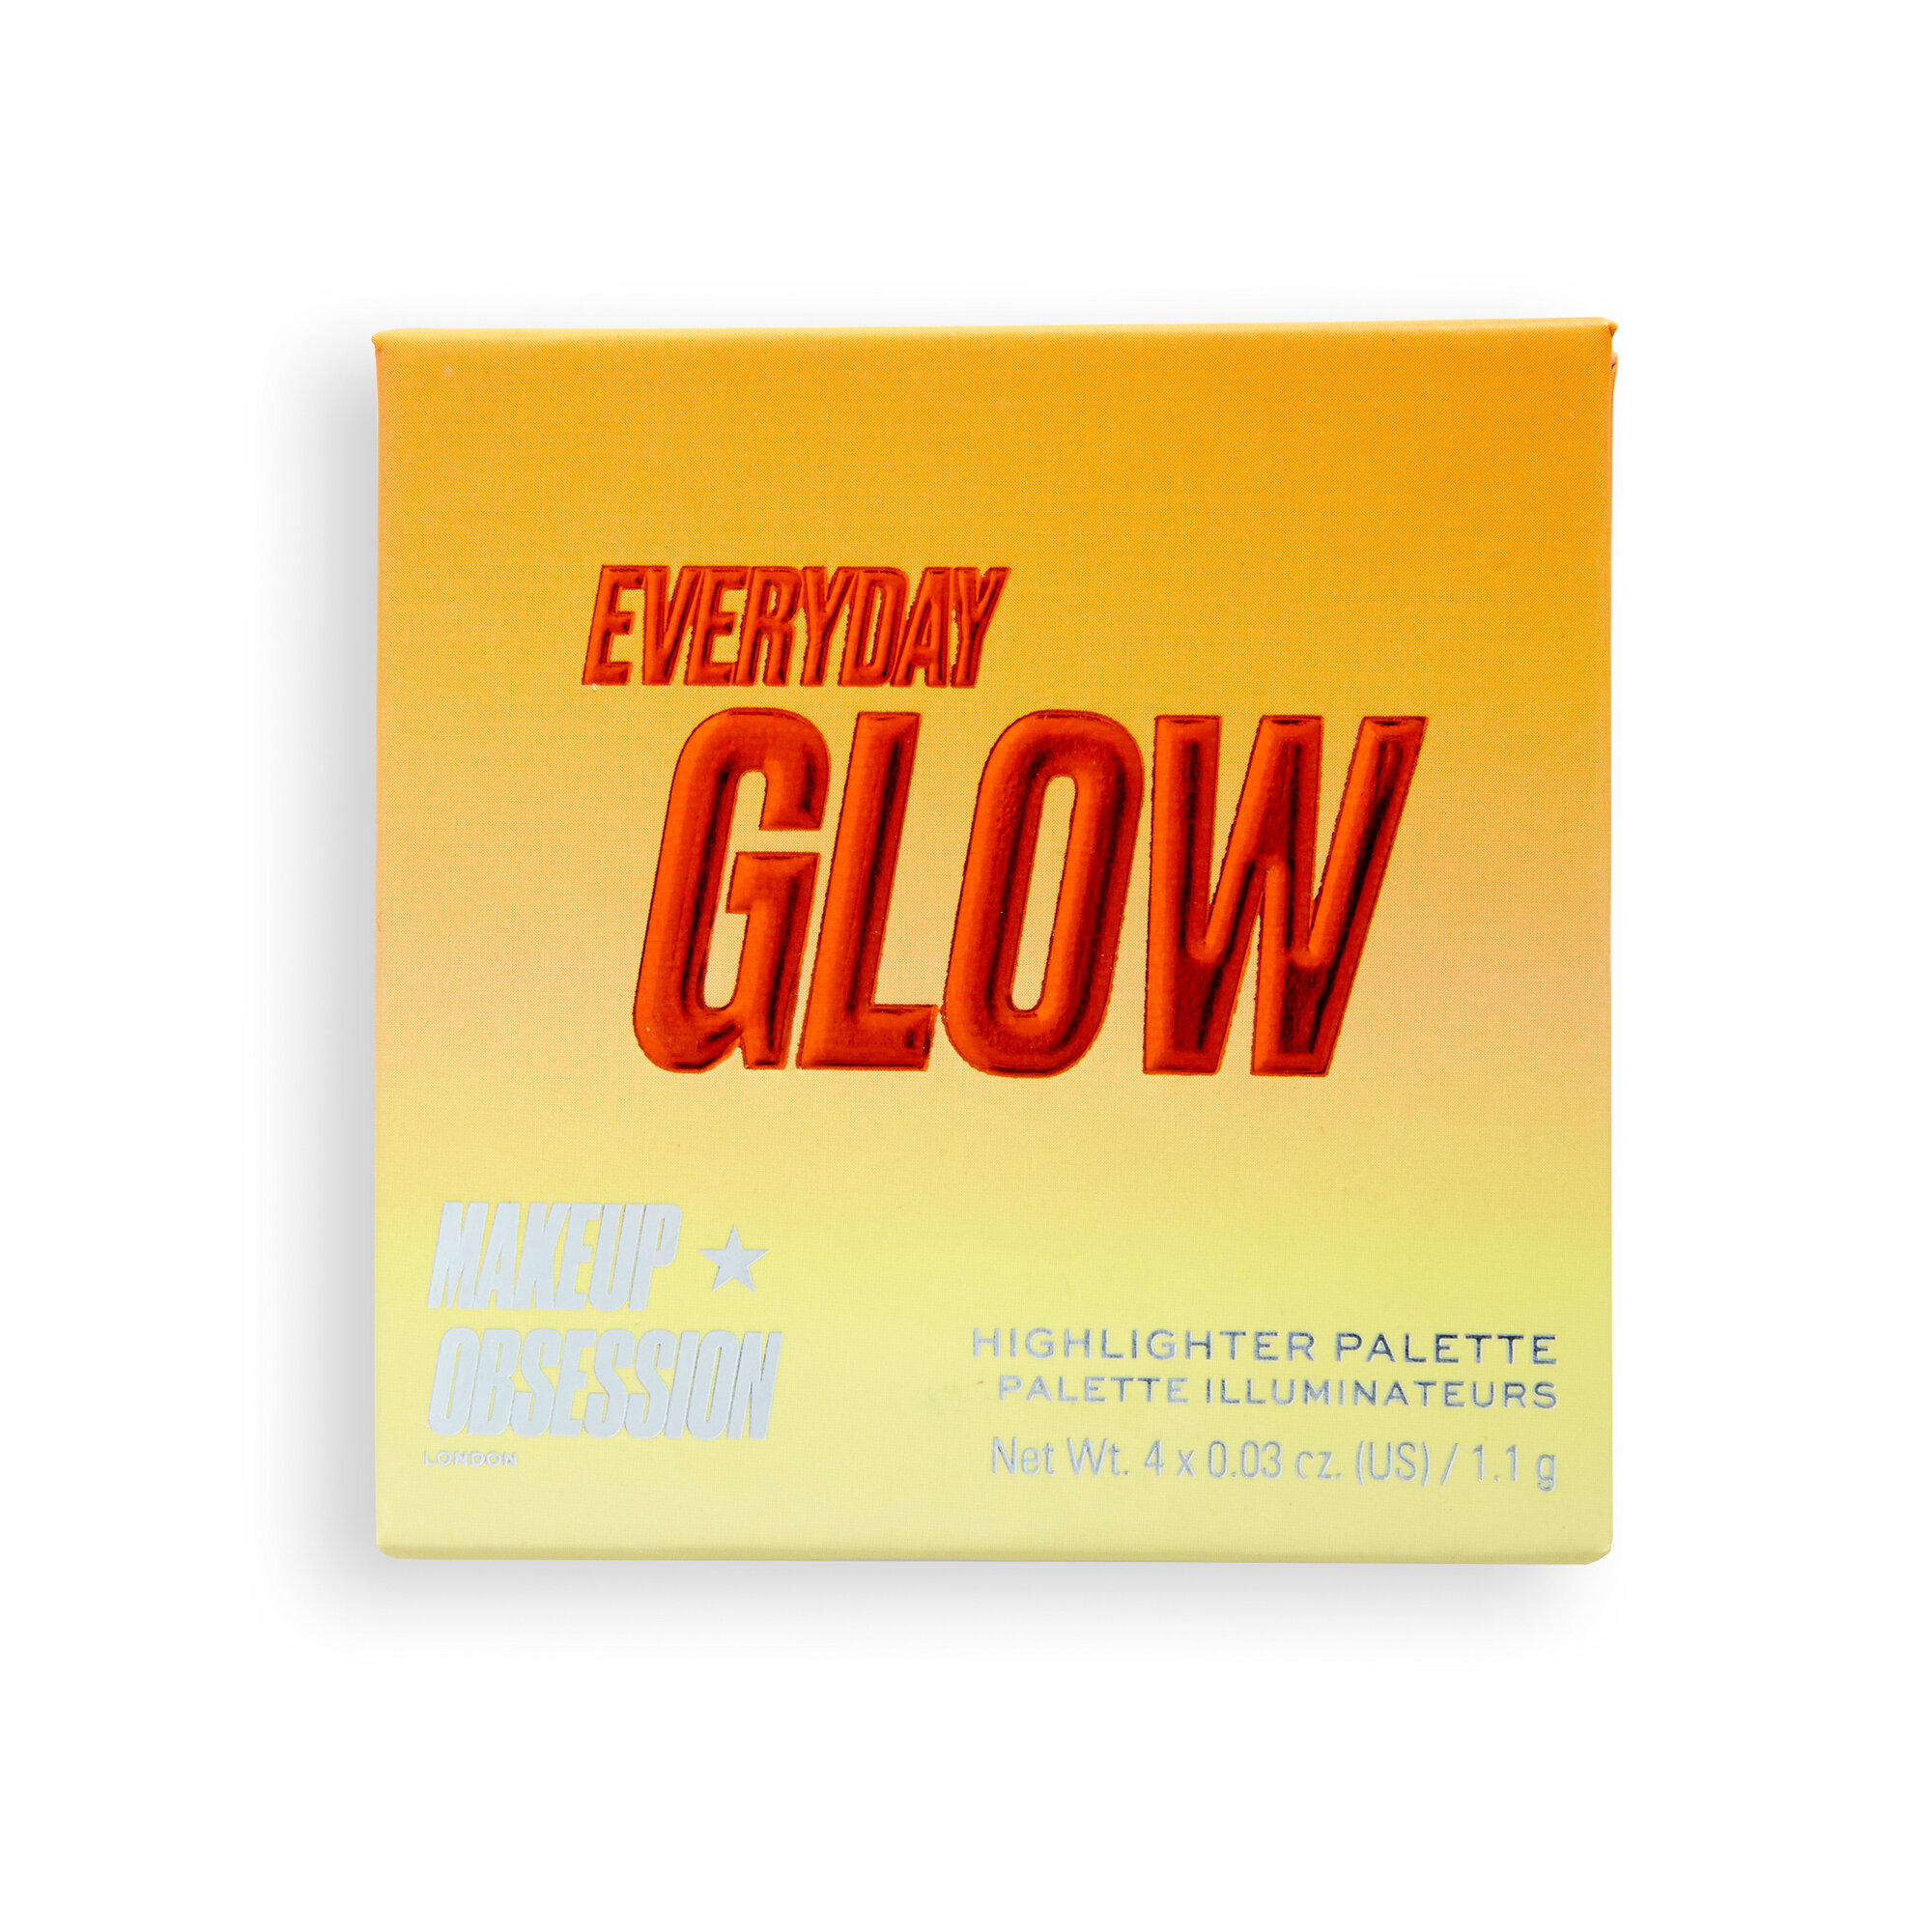 Makeup Obsession Glow Crush Palette Everyday Glow